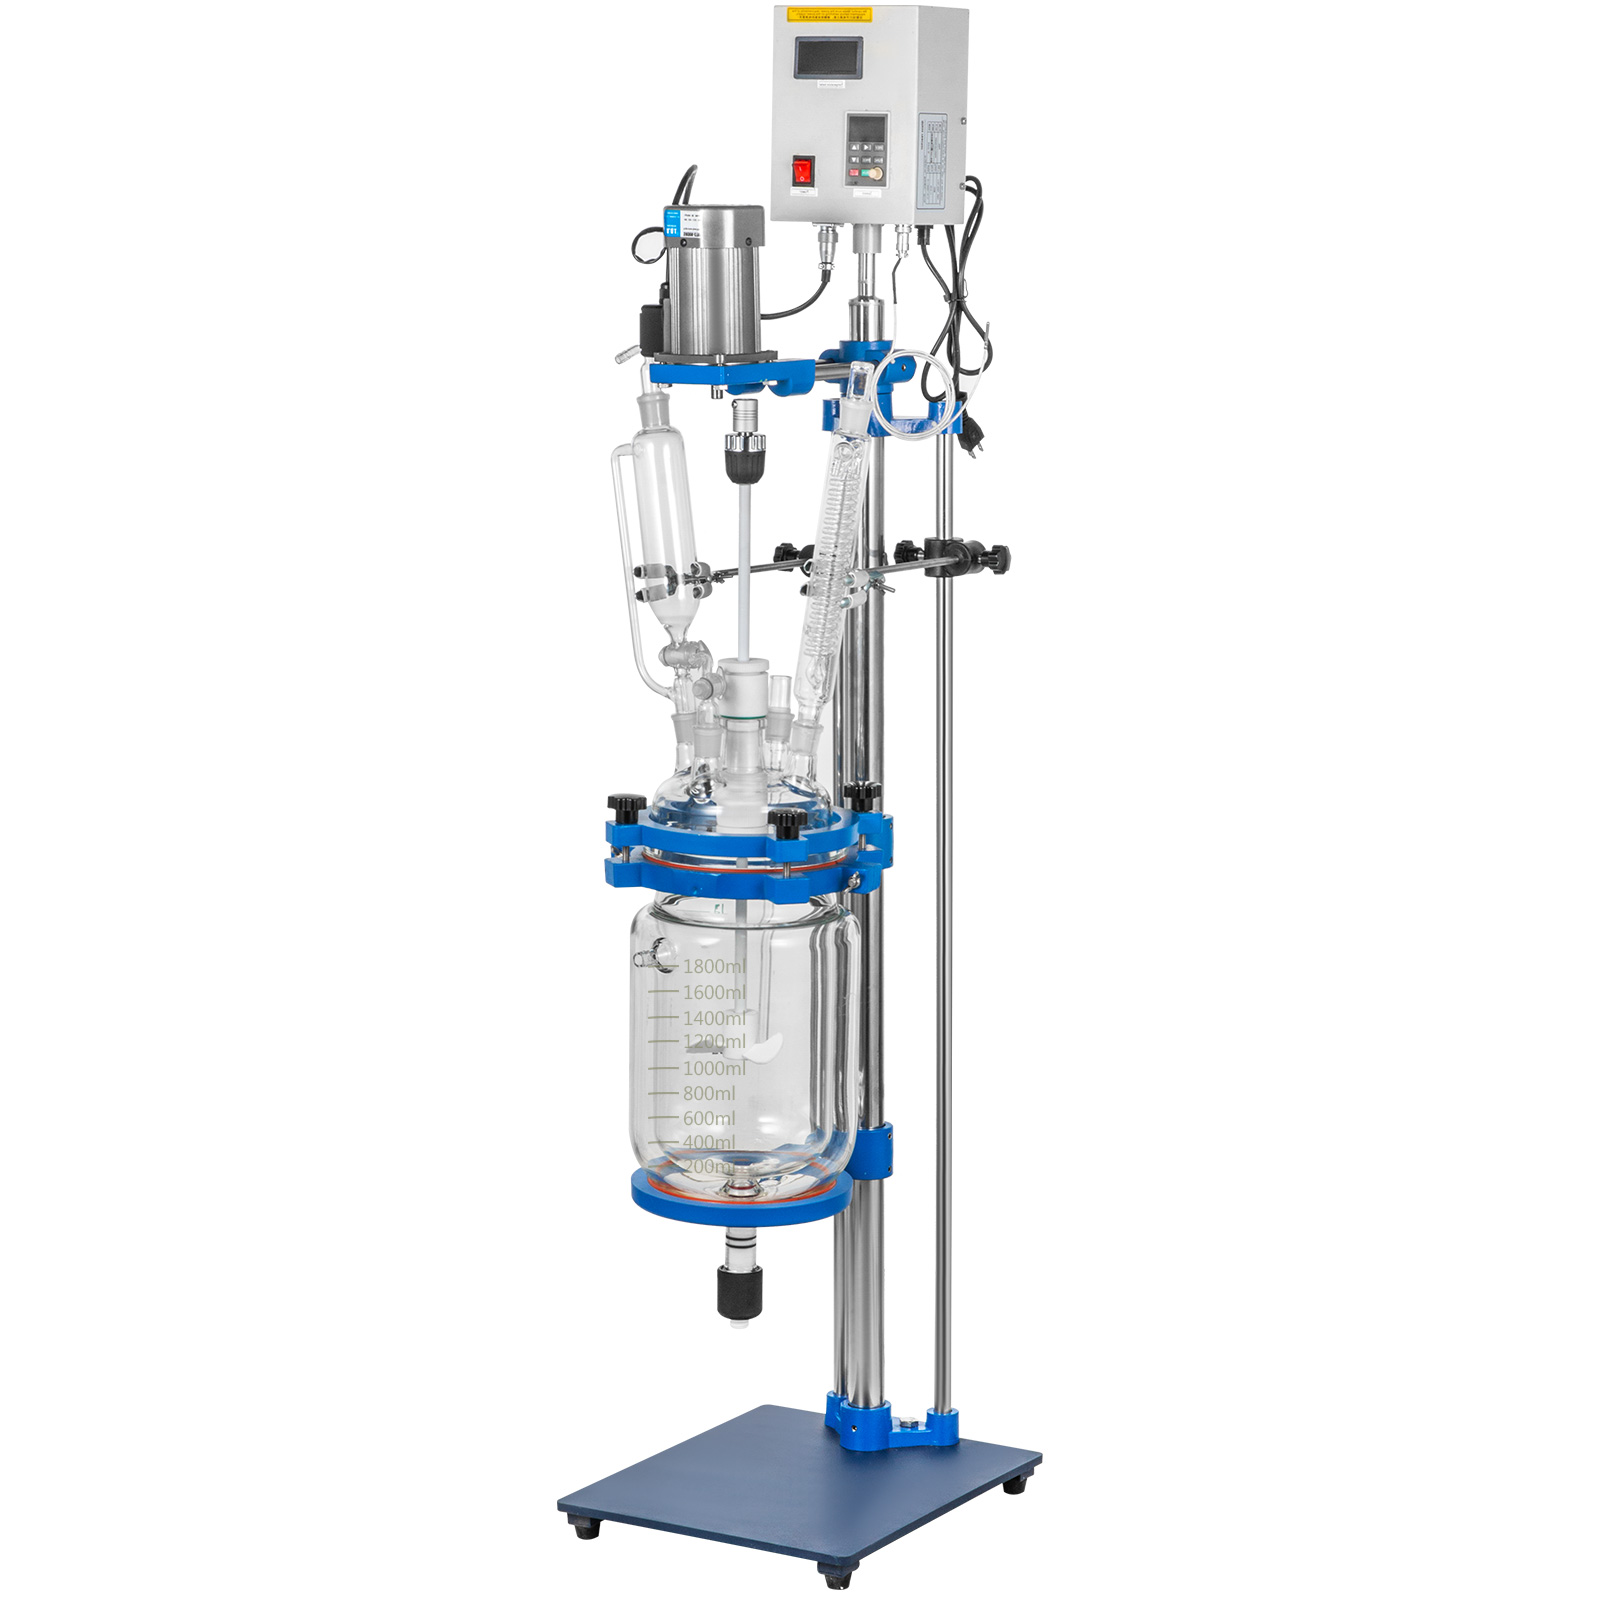 INTBUYING Jacketed Reactor 5L Laboratory Jacketed Glass Reactor Reaction Vessel Chemistry with Digital Display for Reaction Distillation 220V